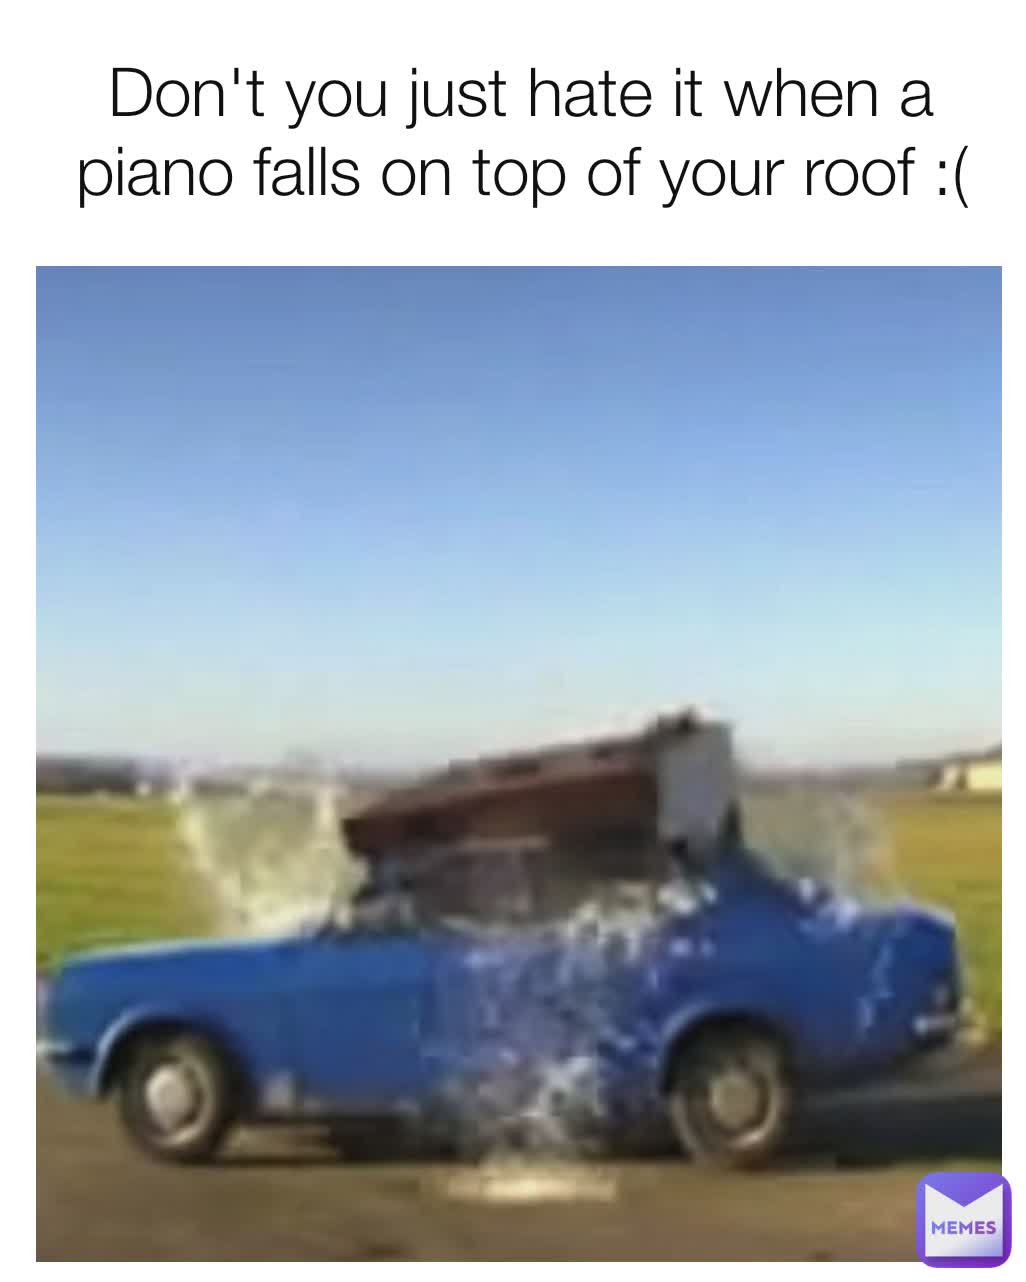 Don't you just hate it when a piano falls on top of your roof :(